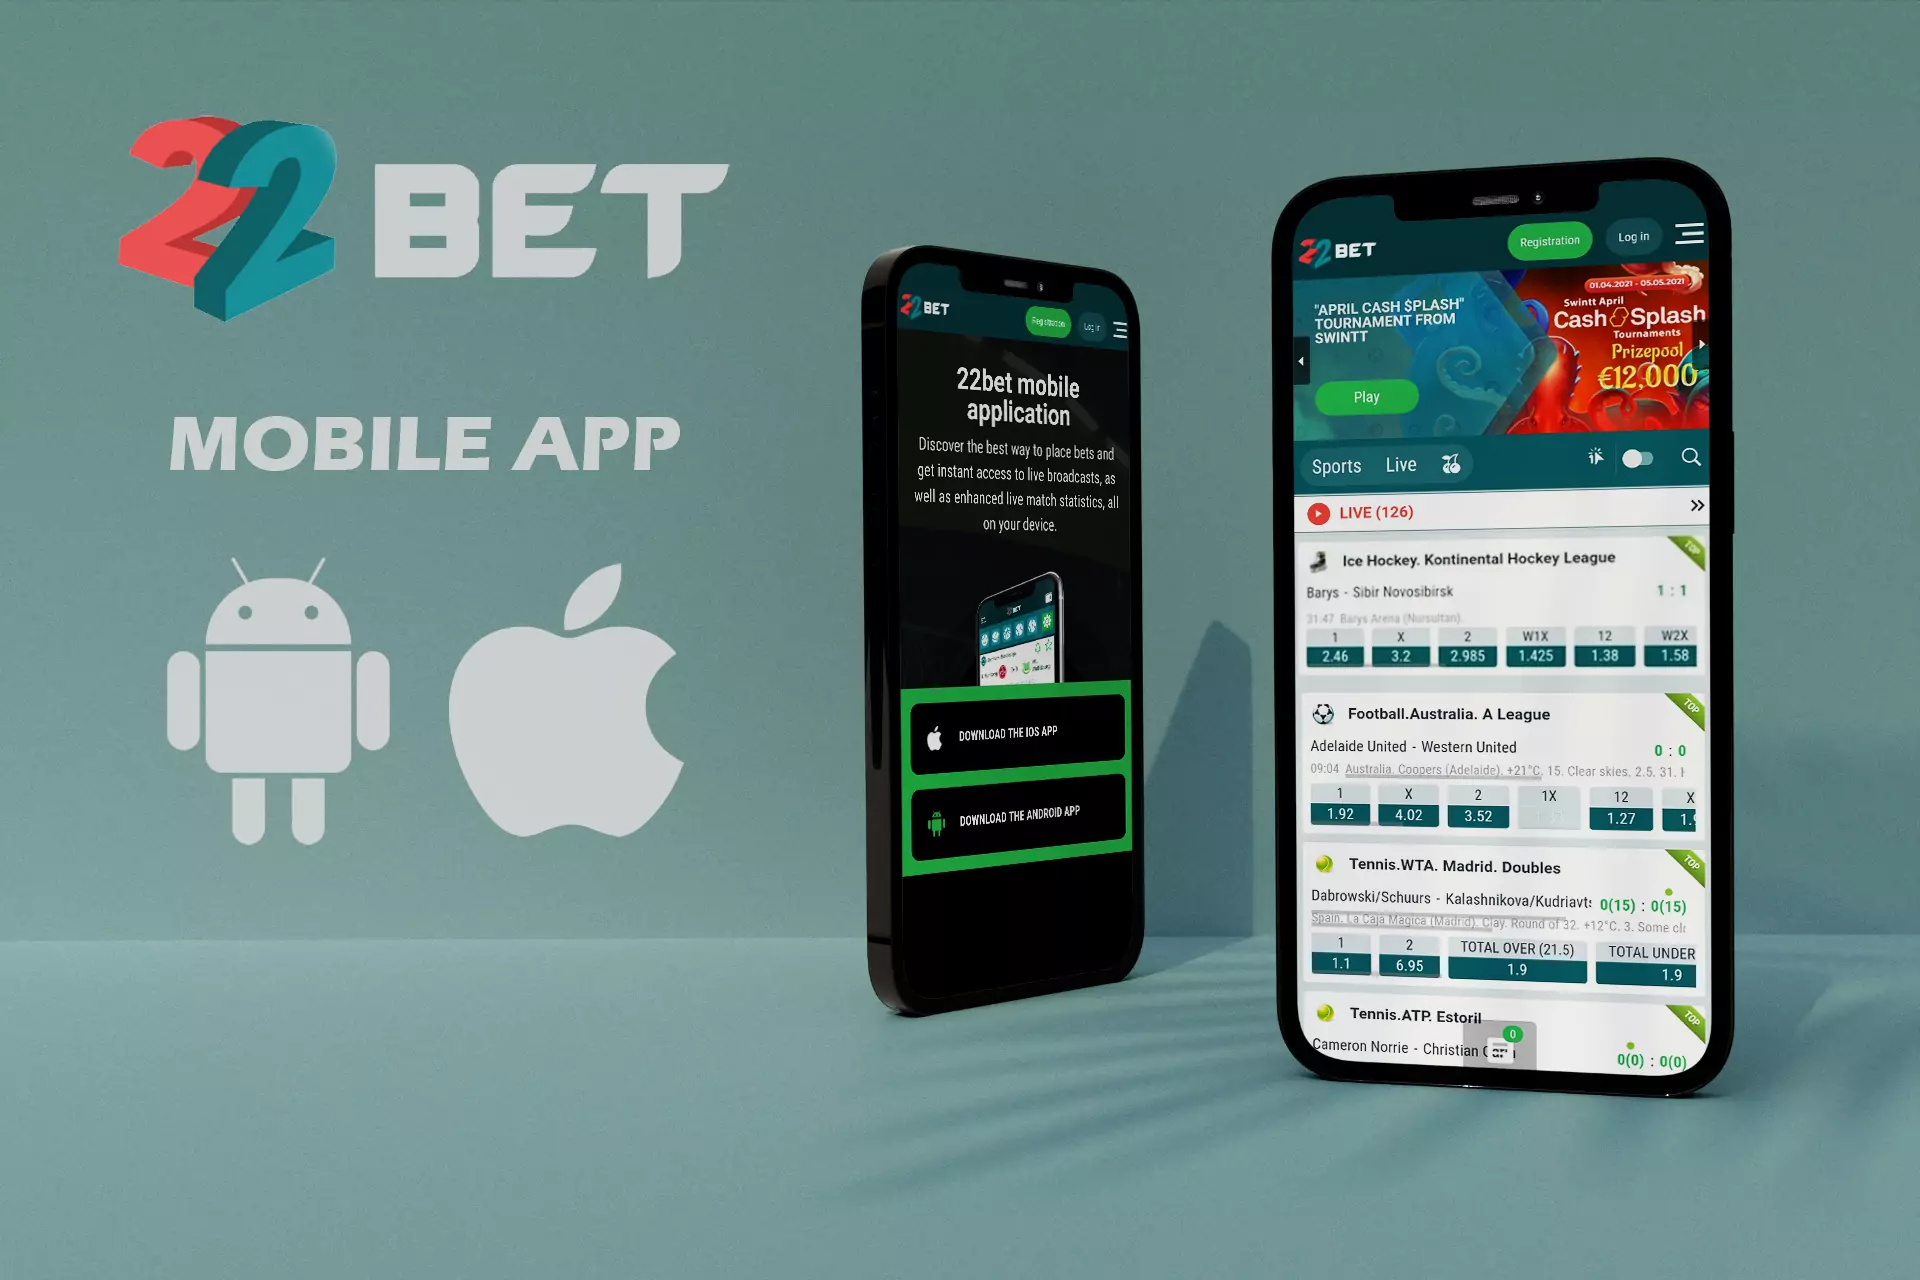 Download the application of the 22bet for your device from the official site.